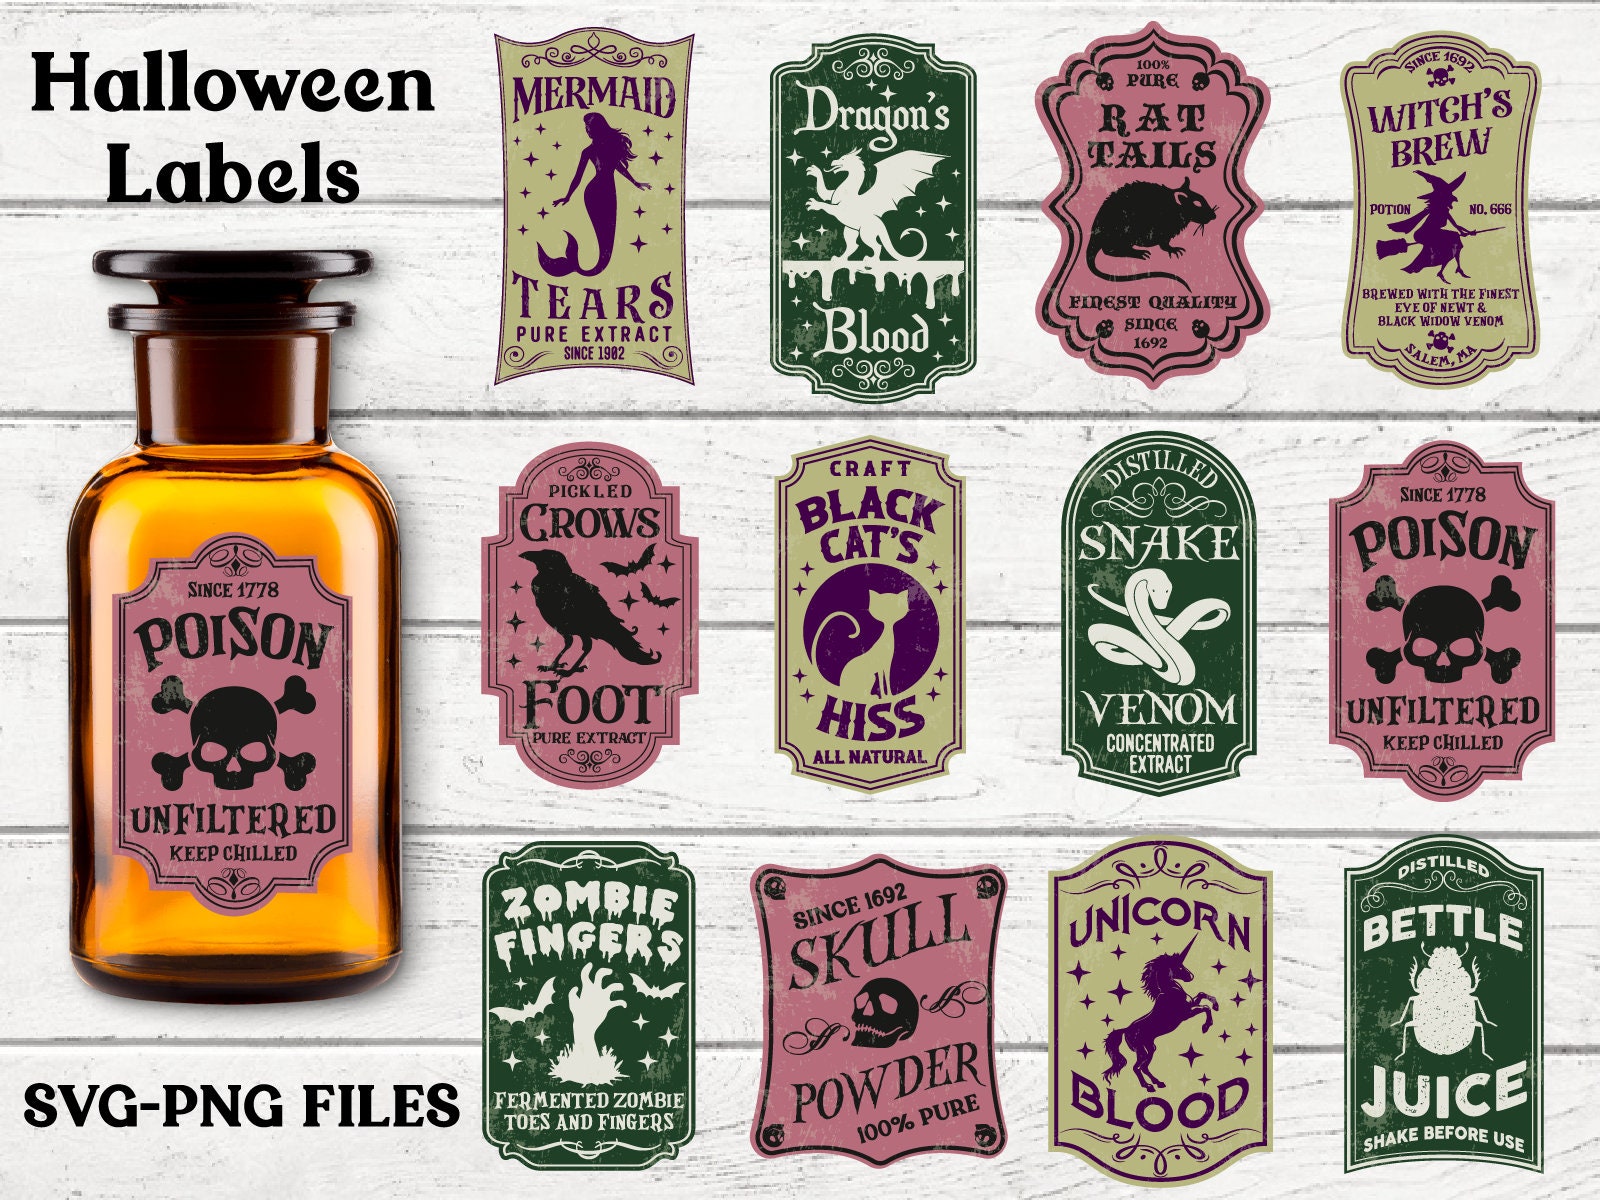 Vintage Style Apothecary Labels, Sticker Sheet, Halloween Stickers, Potion  Labels, Pharmacy Labels, Eye of Newt, Scorpion Venom, Antique Art